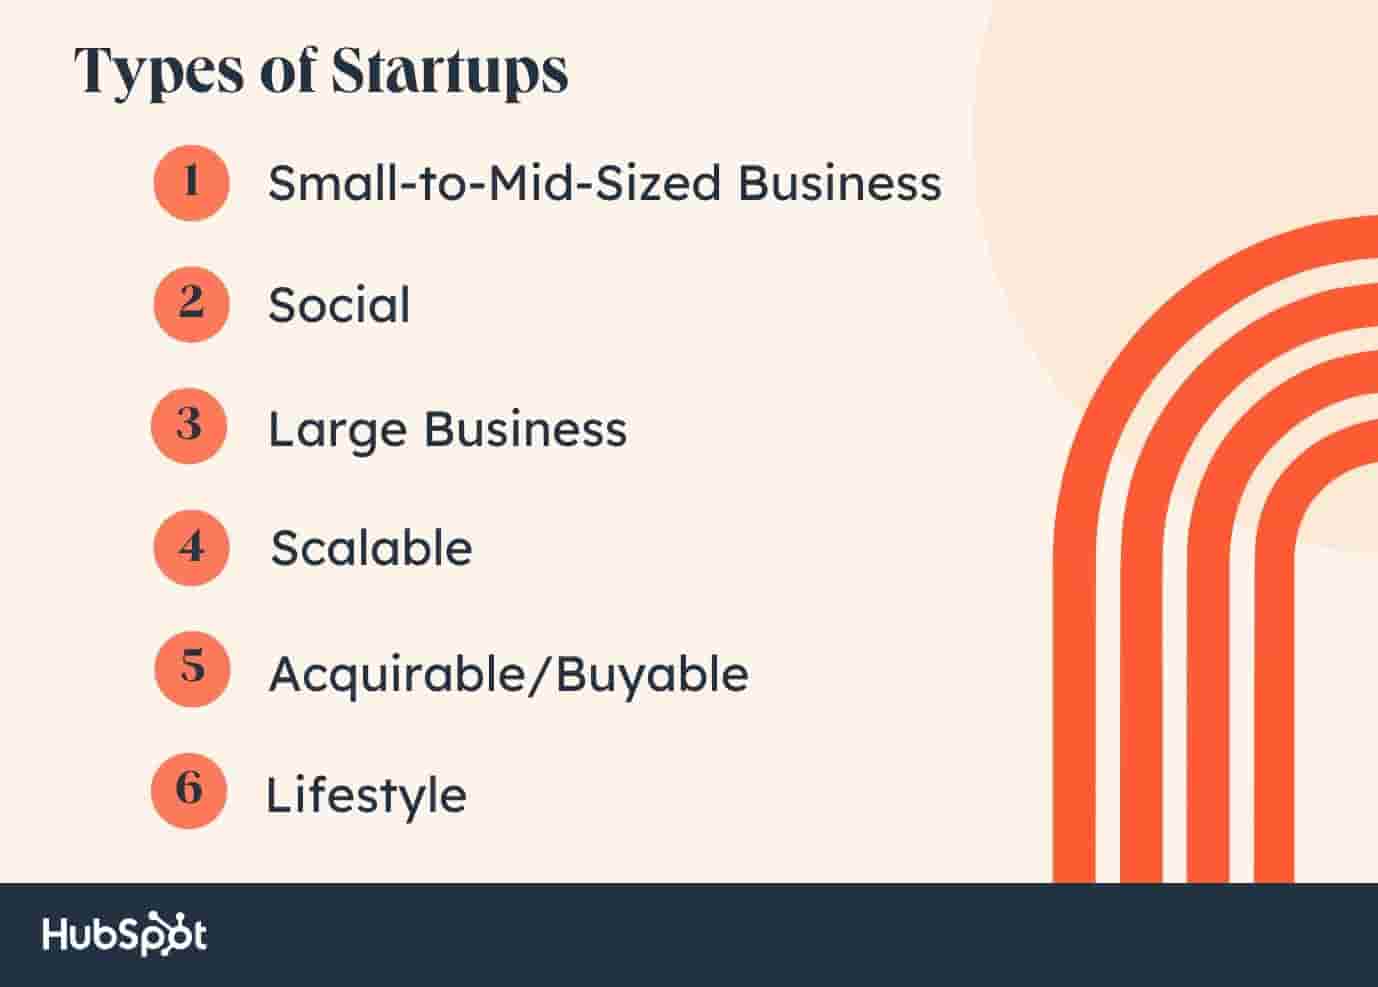 types of startups include small to mid-sized business, social, large business, scalable, acquirable/buyable and lifestyle